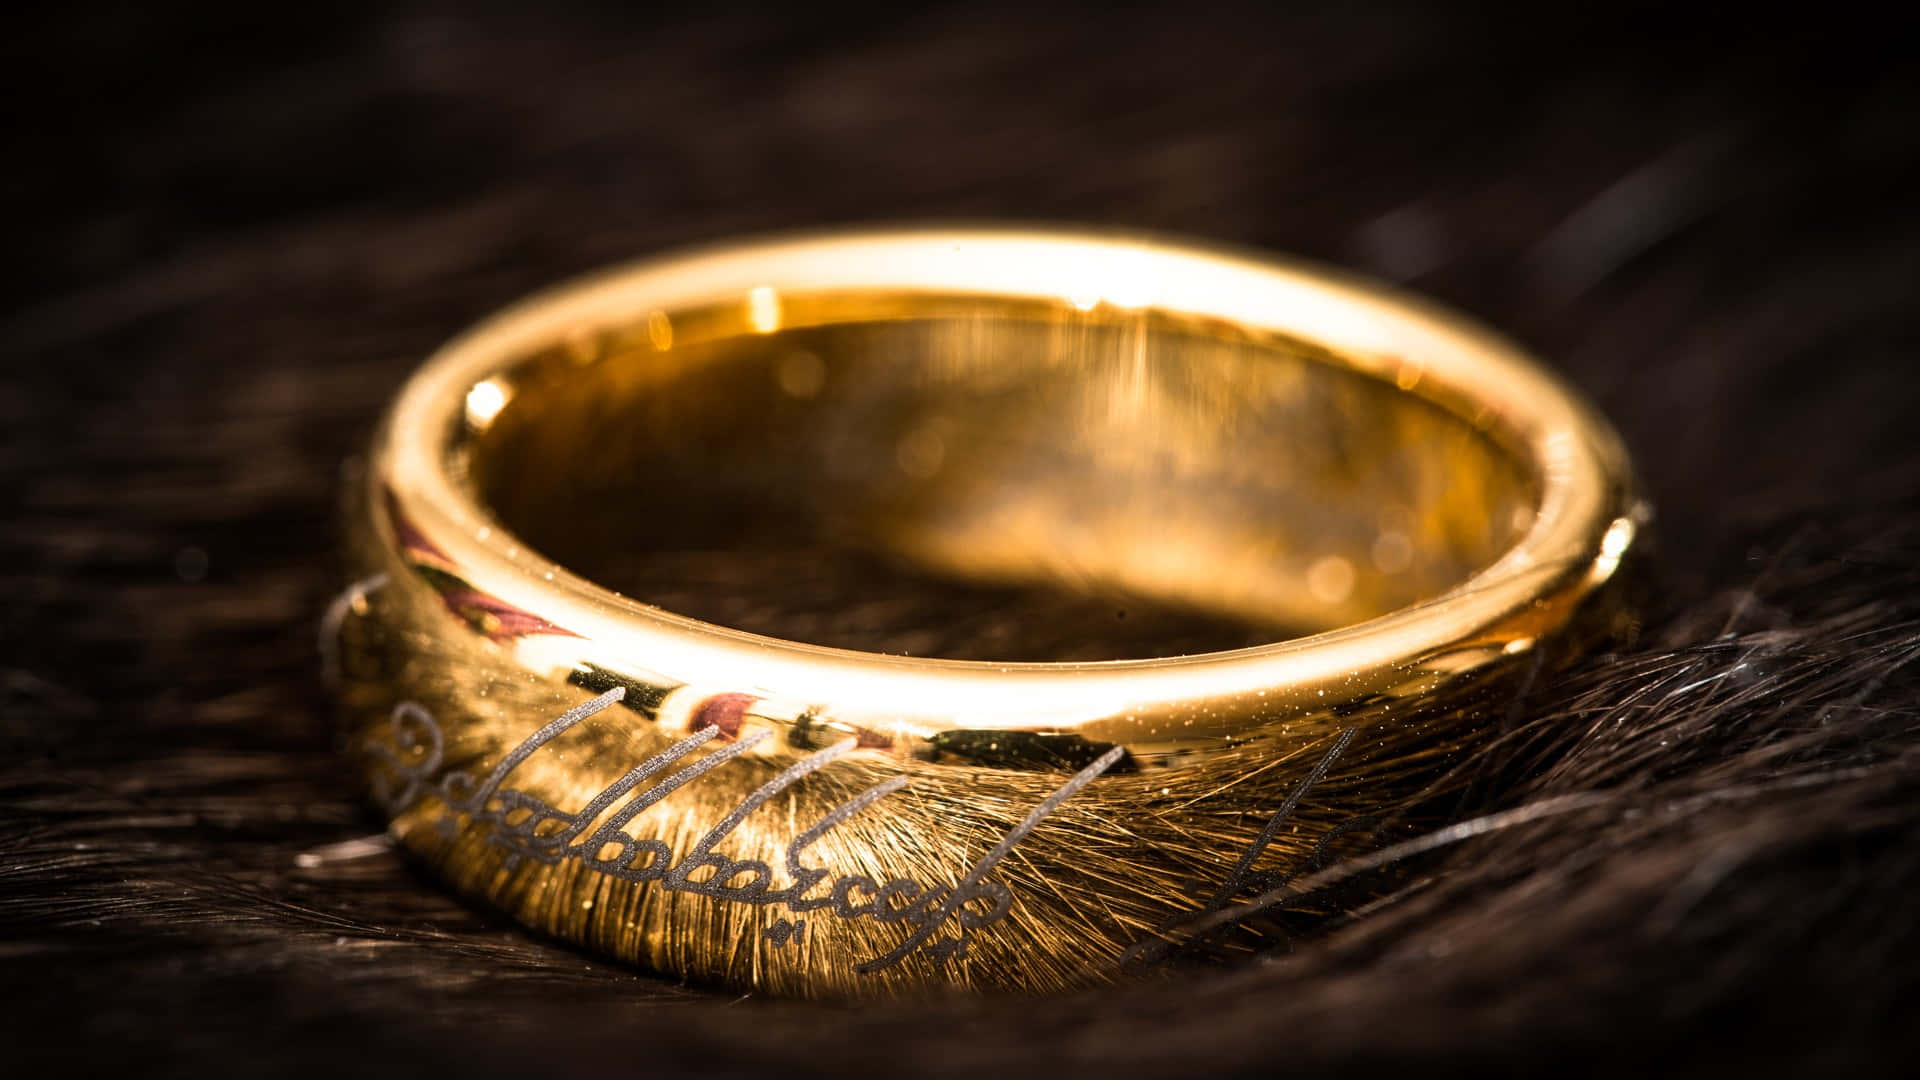 A Gold Ring With The Lord Of The Rings Written On It